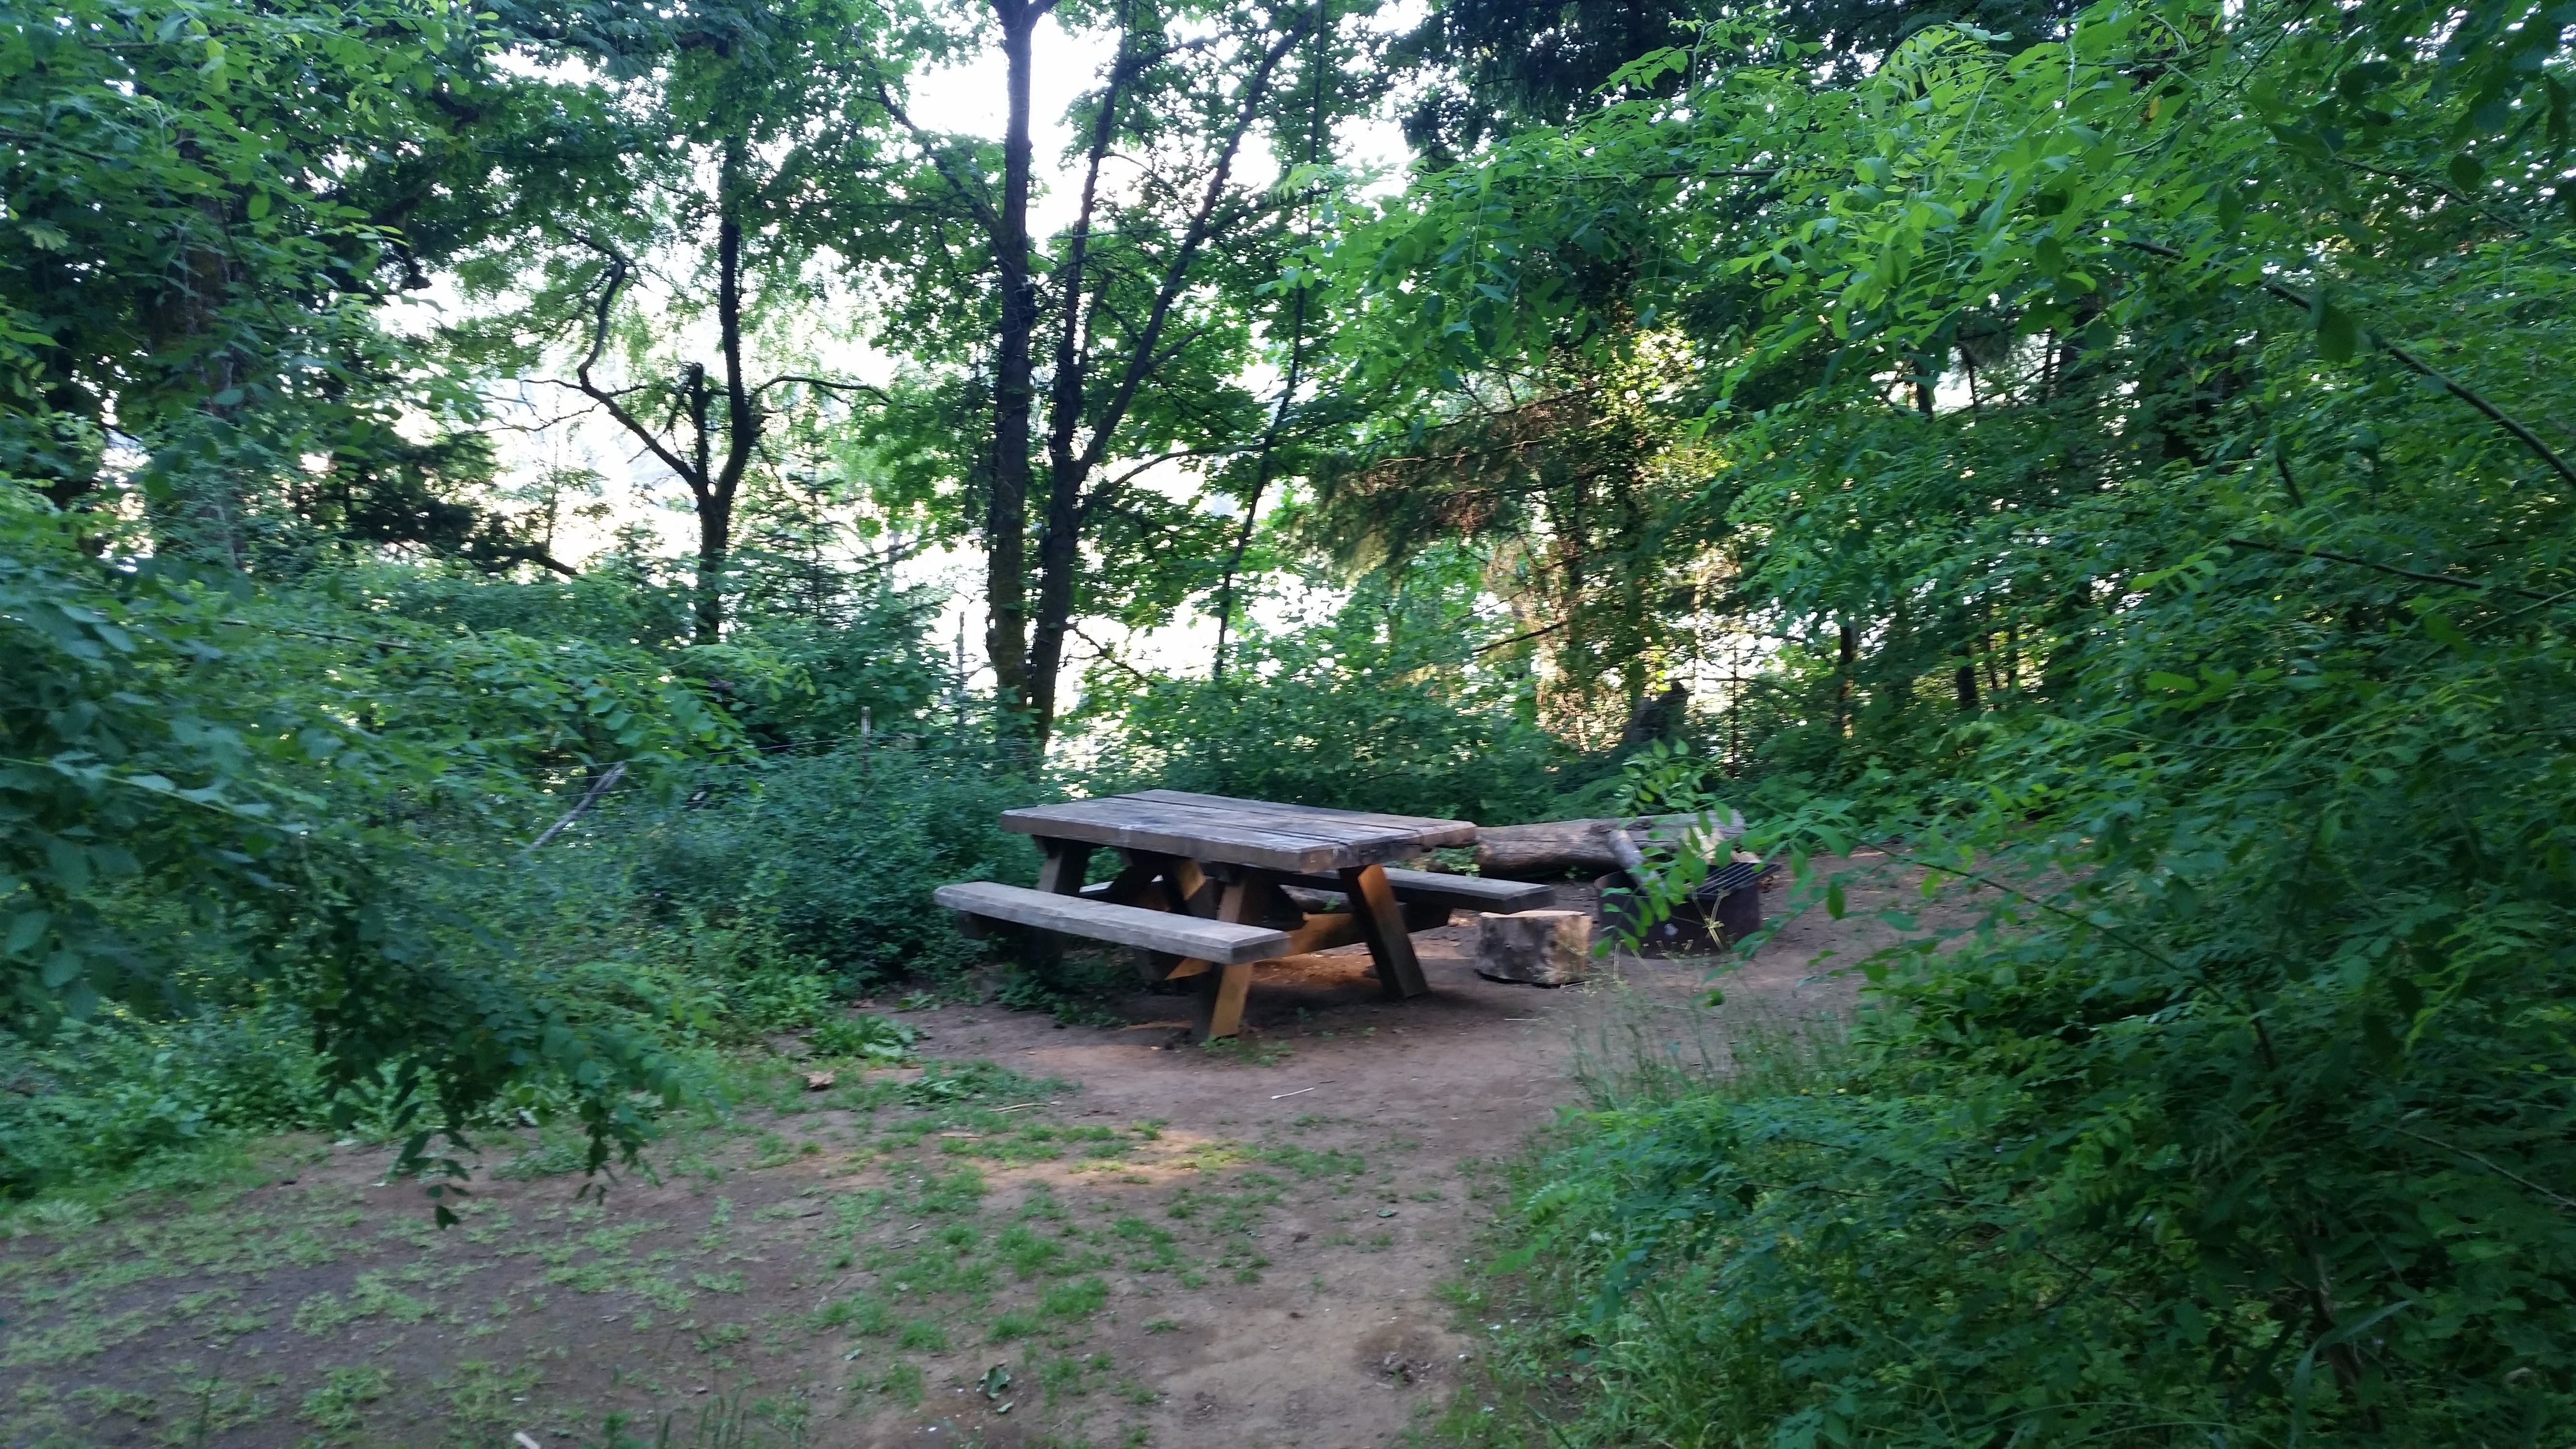 Camper submitted image from Eagle Creek Campground - 5